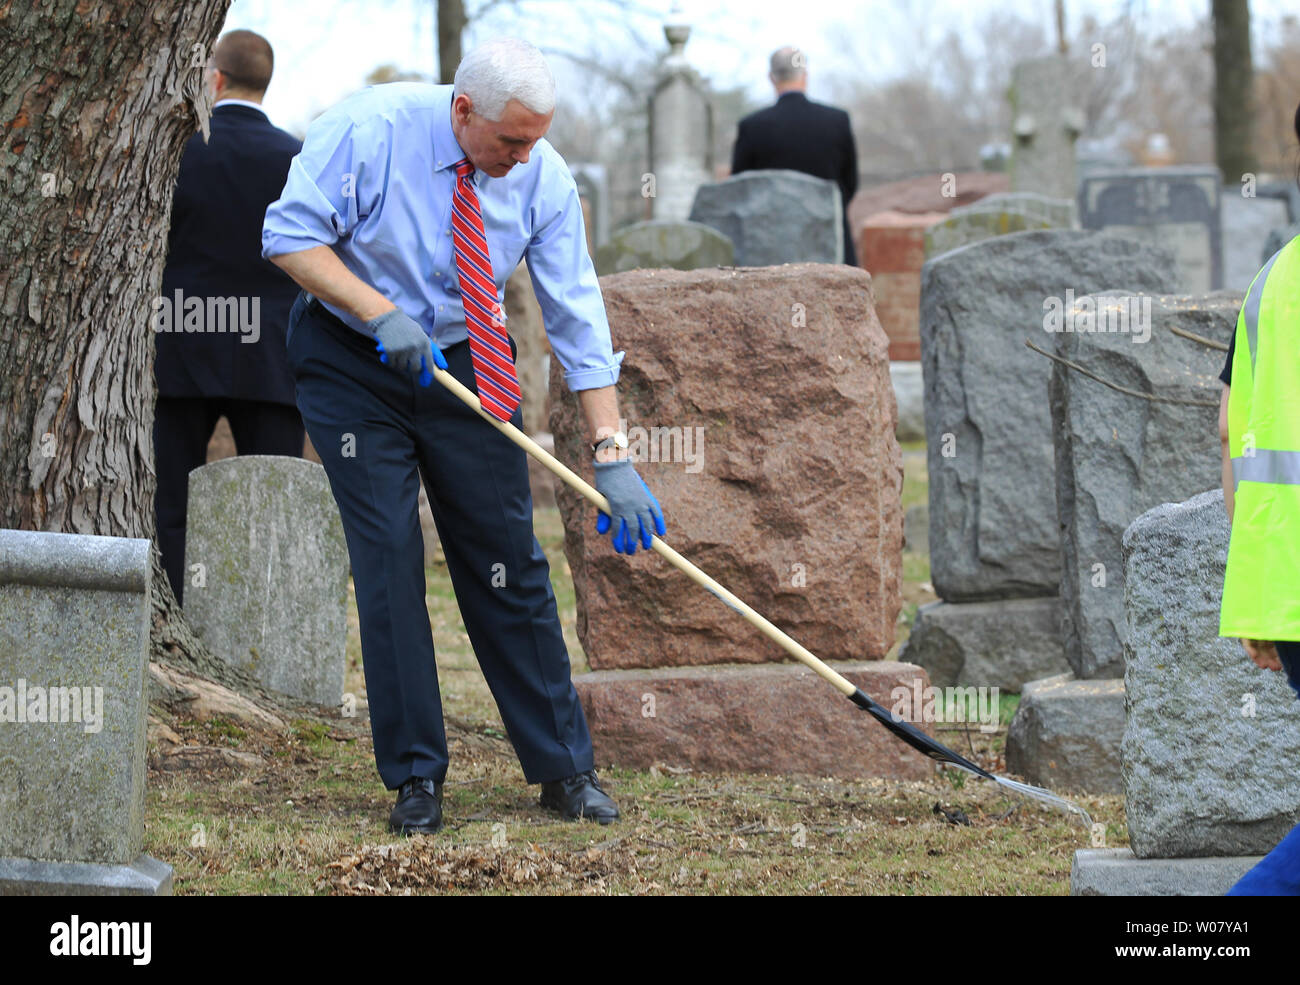 Vice President Mike Pence rakes leaves at Chesed Shel Emeth Cemetery in University City on February 22, 2017. Vandals toppled nearly 200 headstones on February 20, 2017 in the Jewish cemetery. Pence who was in town for another event had asked to go to the cemetery for the large community cleanup that attracted over four thousand people.  Photo by Bill Greenblatt/UPI Stock Photo